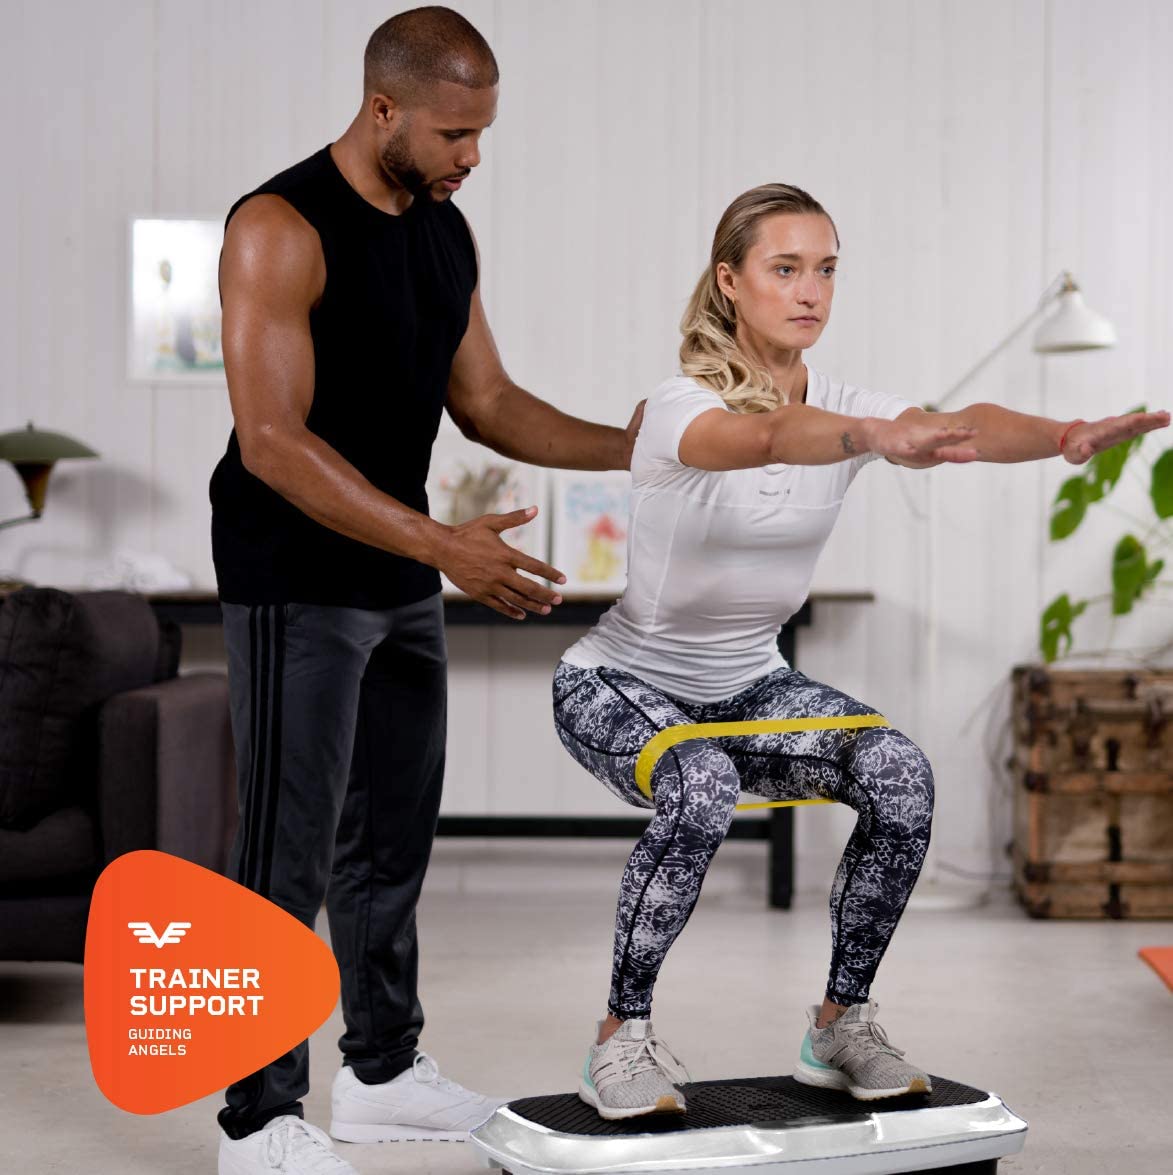 Vibration Plate Exercise Machine - Vibrating Platform with Adjustable Speed  and 3 Strength Modes - Workout Equipment by Wakeman